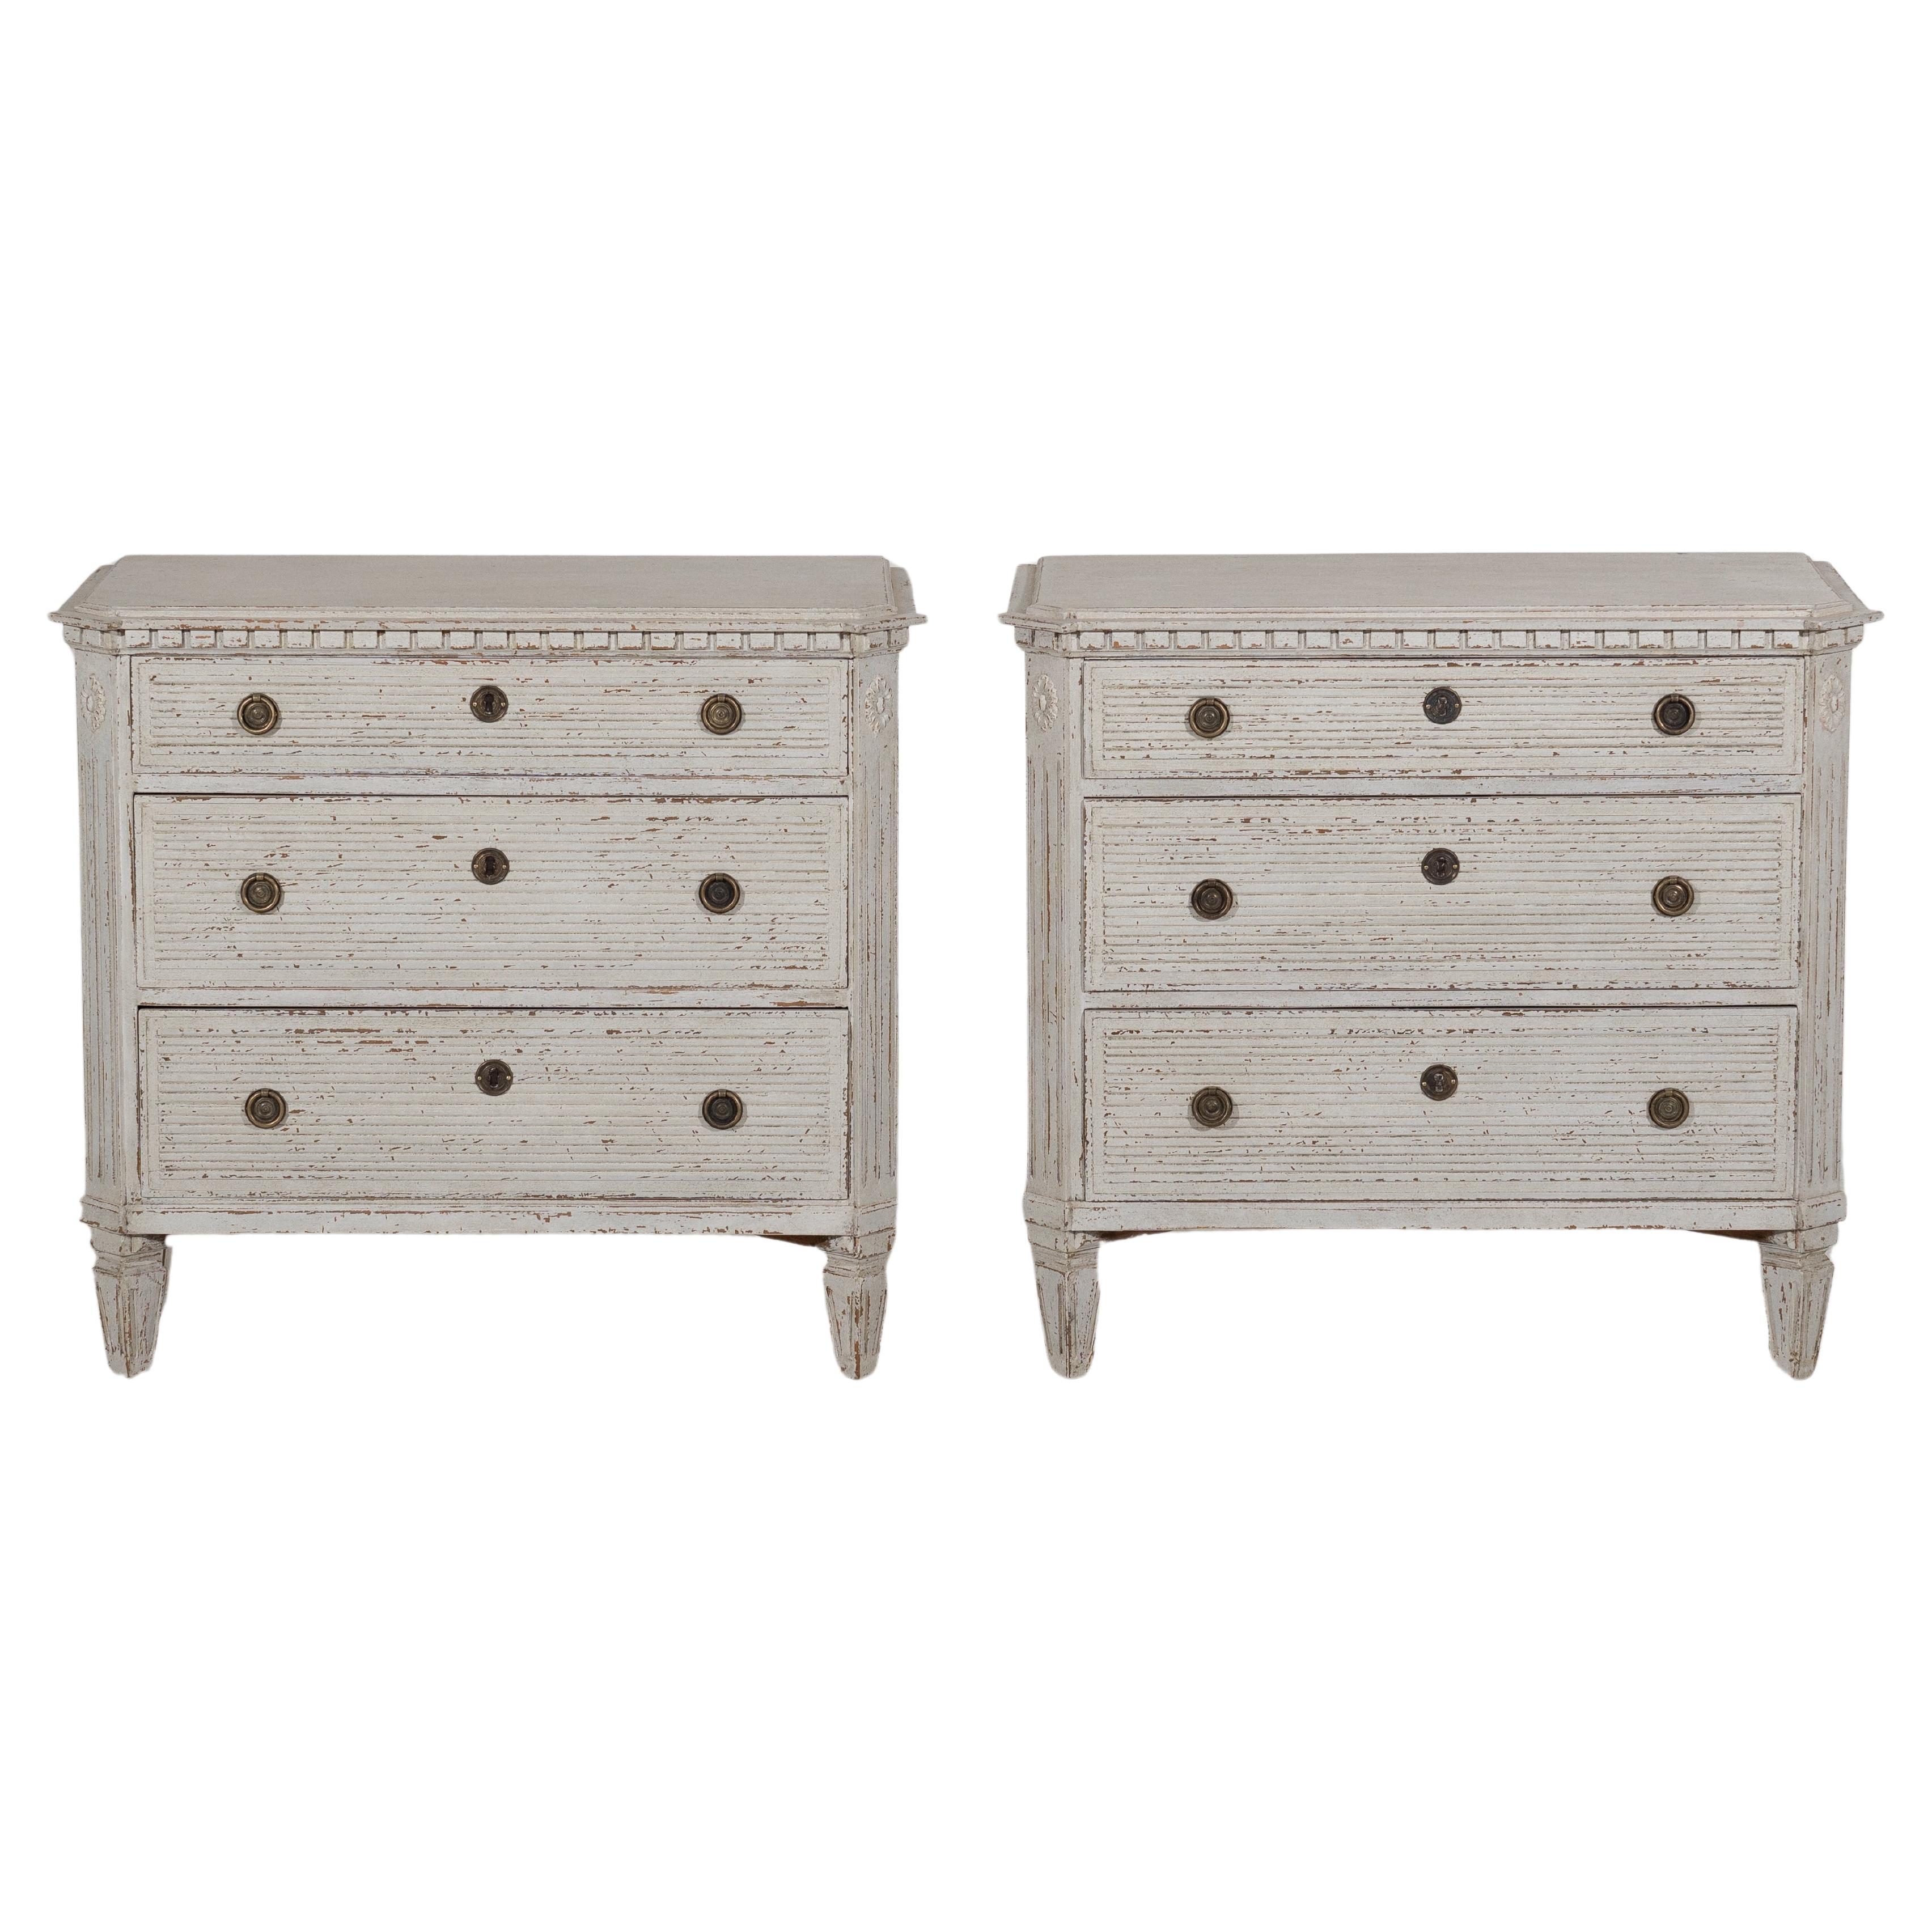 Stunning pair of Scandinavian chests, 19th C. For Sale